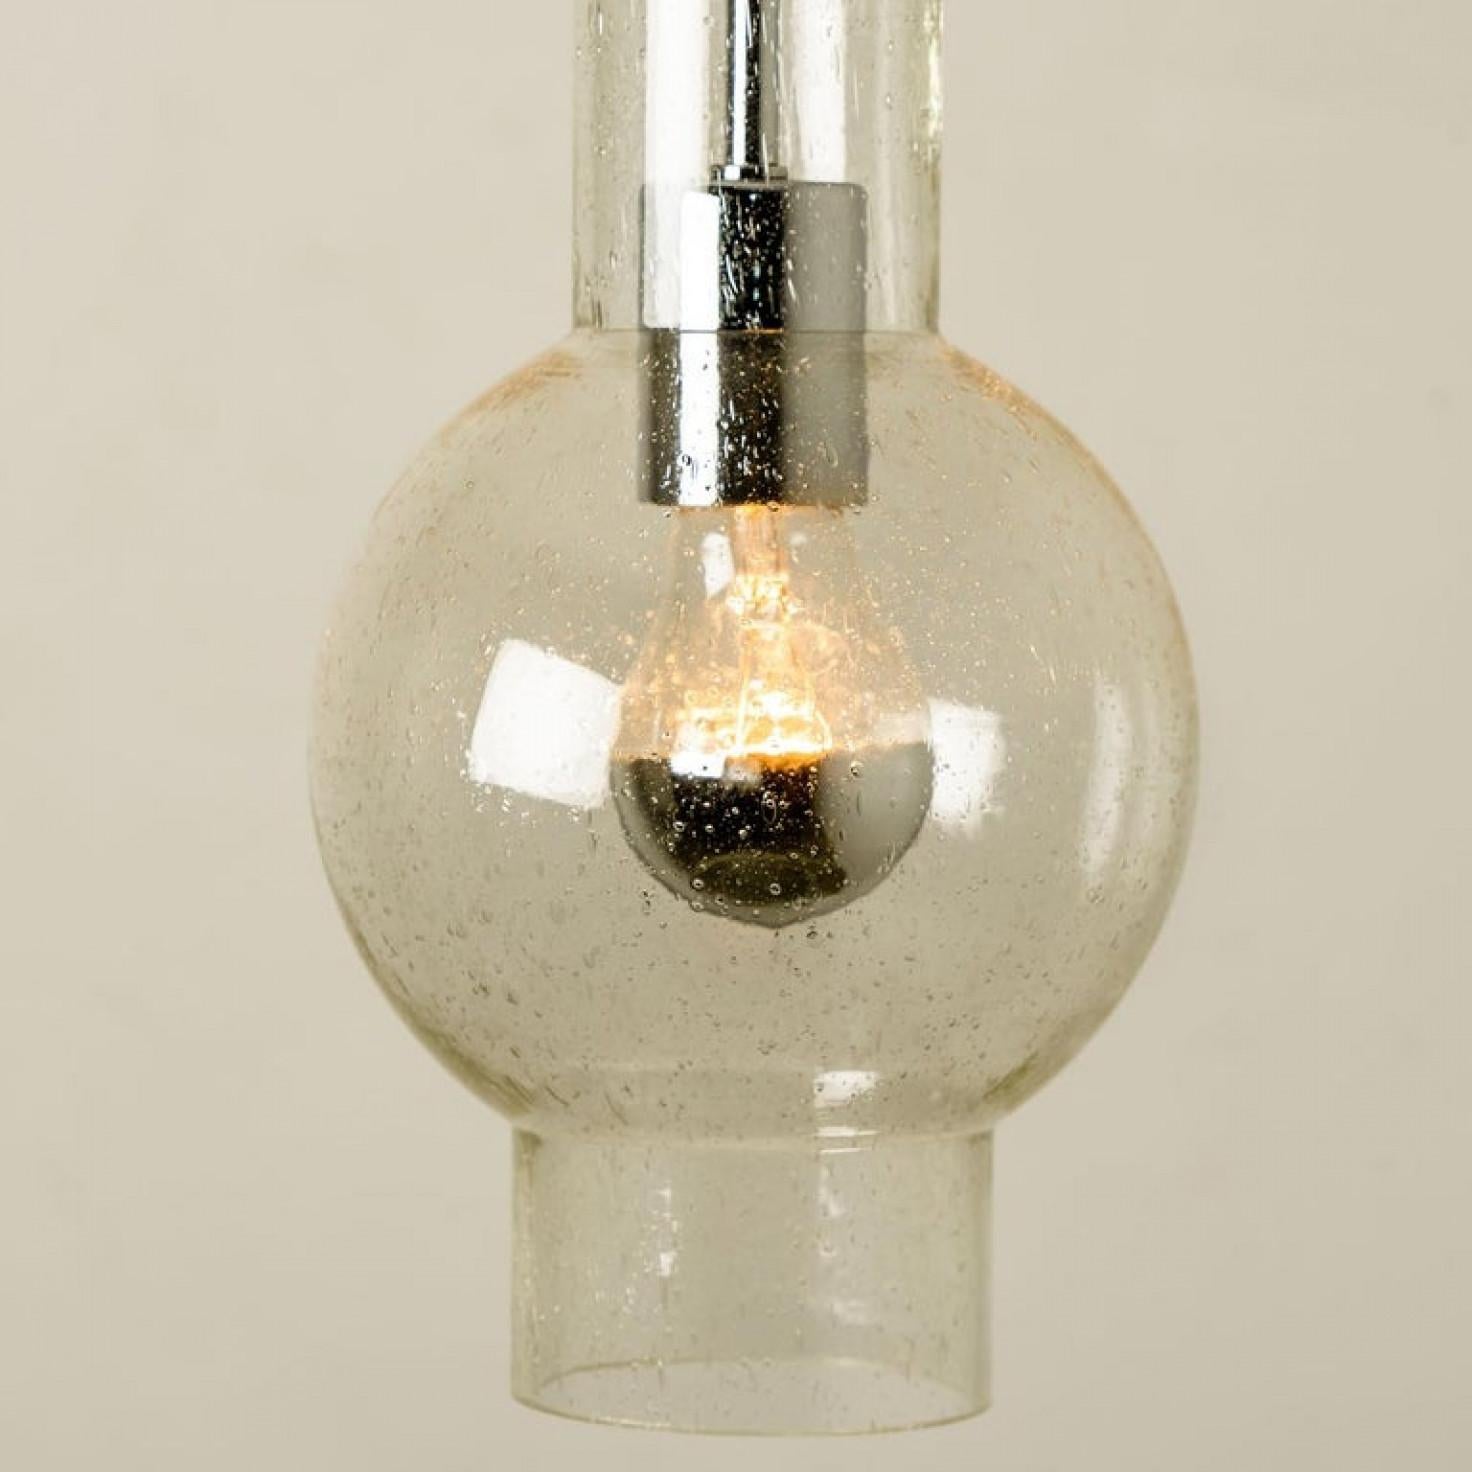 Space Age 1 of the 7 Hand Blown Glass Tube Pedant Lights by Staff Lights 1970s, Germany For Sale